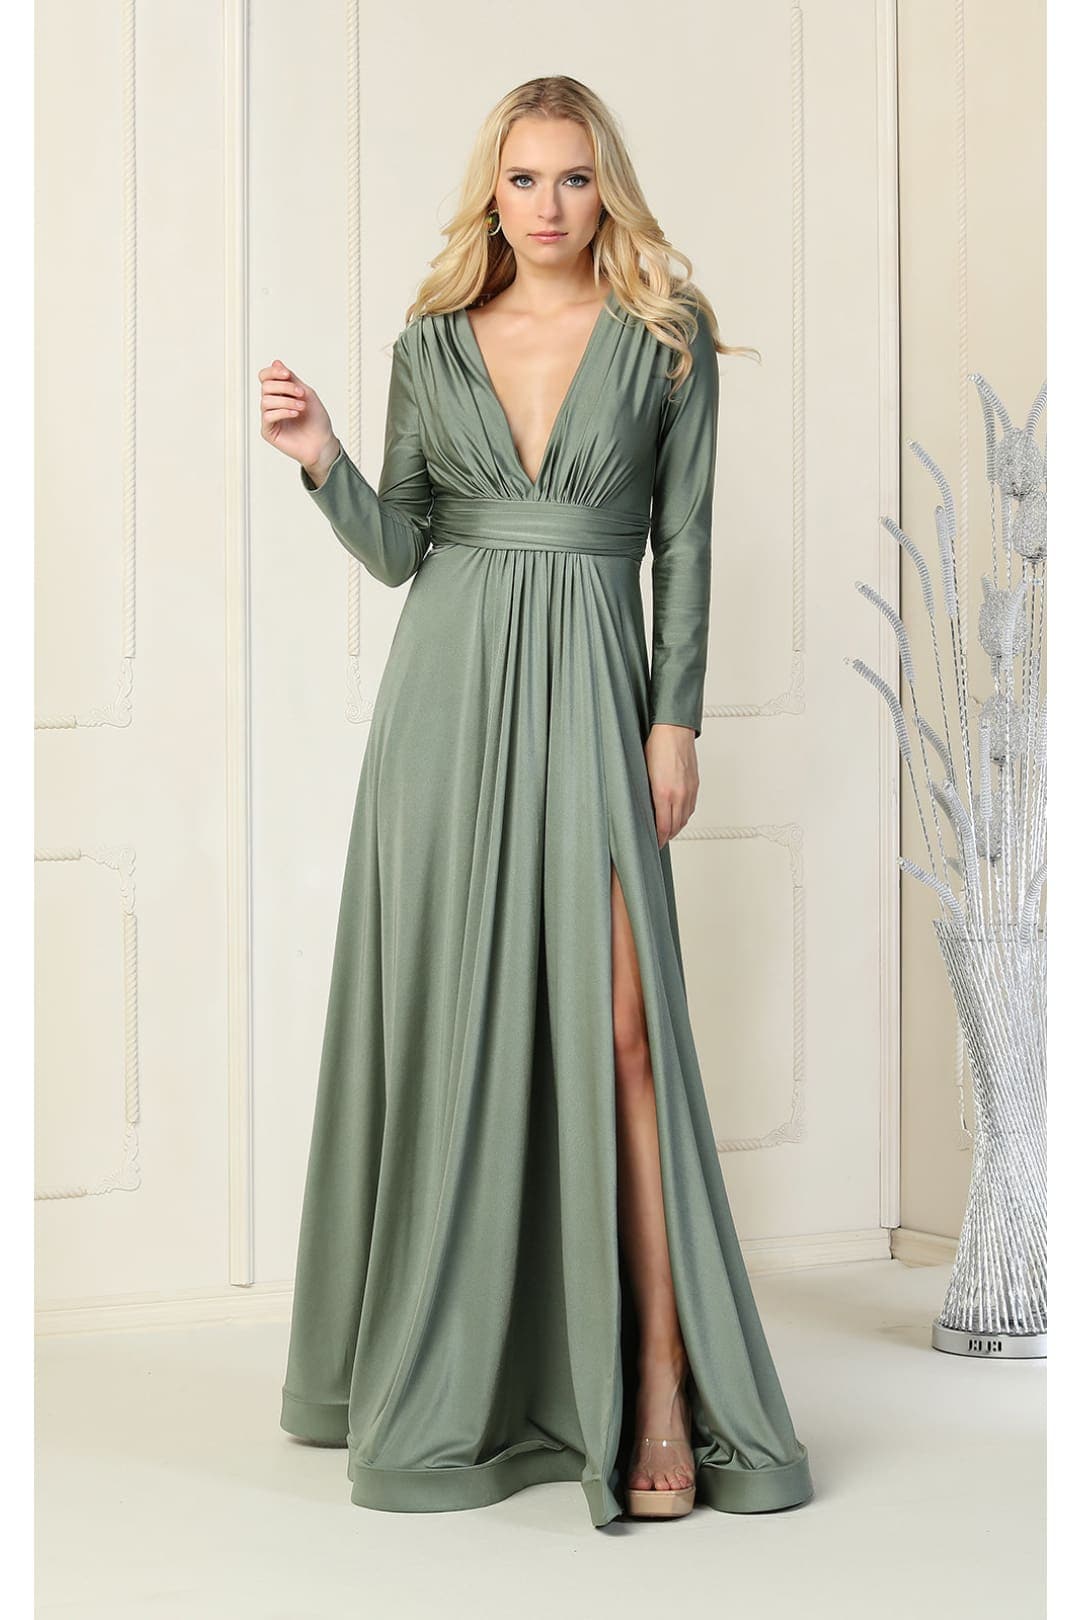 Stretchy Formal Evening Gown - OLIVE / 4